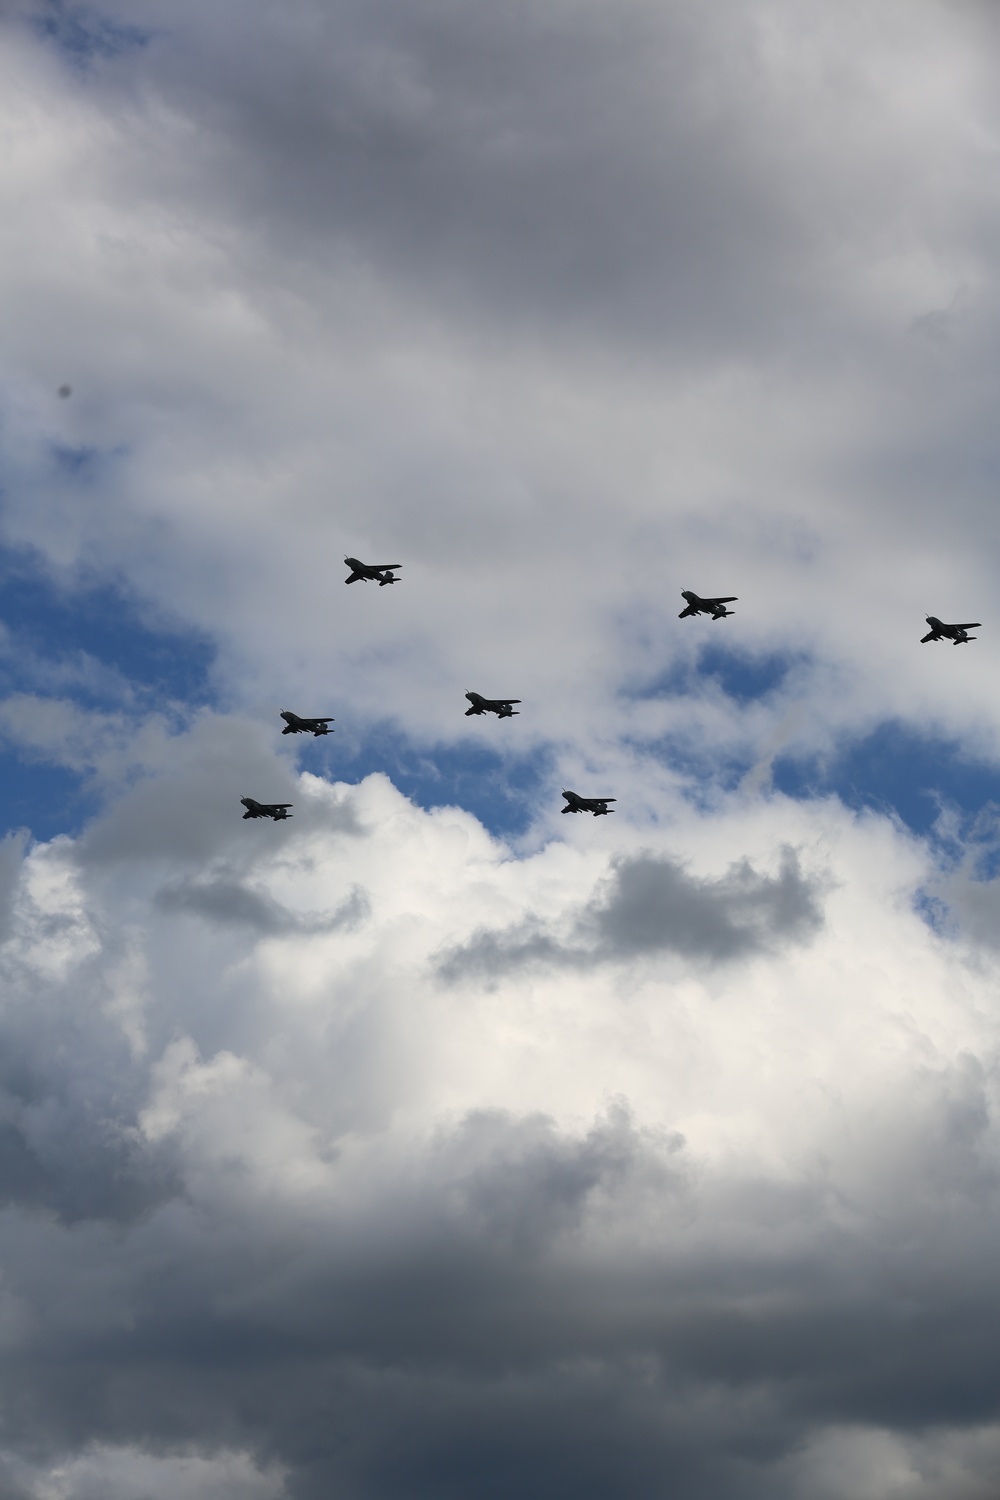 VMAQT-1 Marines conduct historic fly-by, lauded for excellence